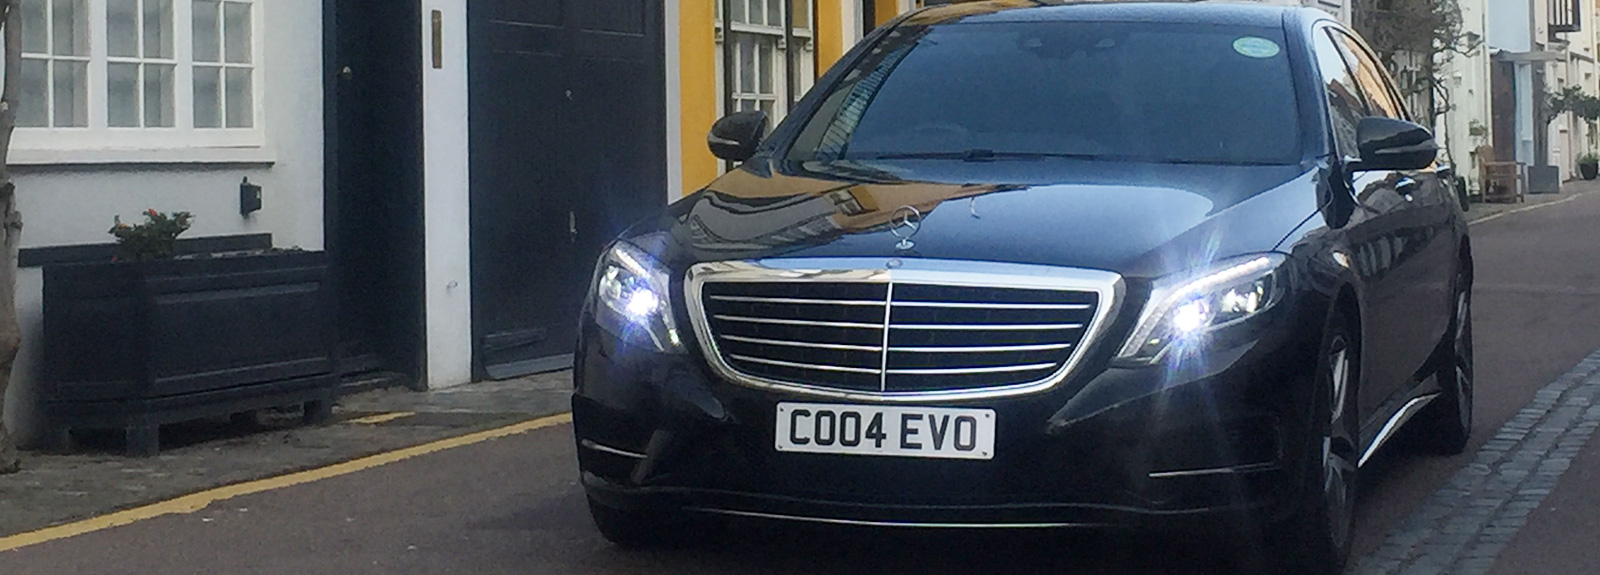 Professional Chauffeur Service Across Hertfordshire